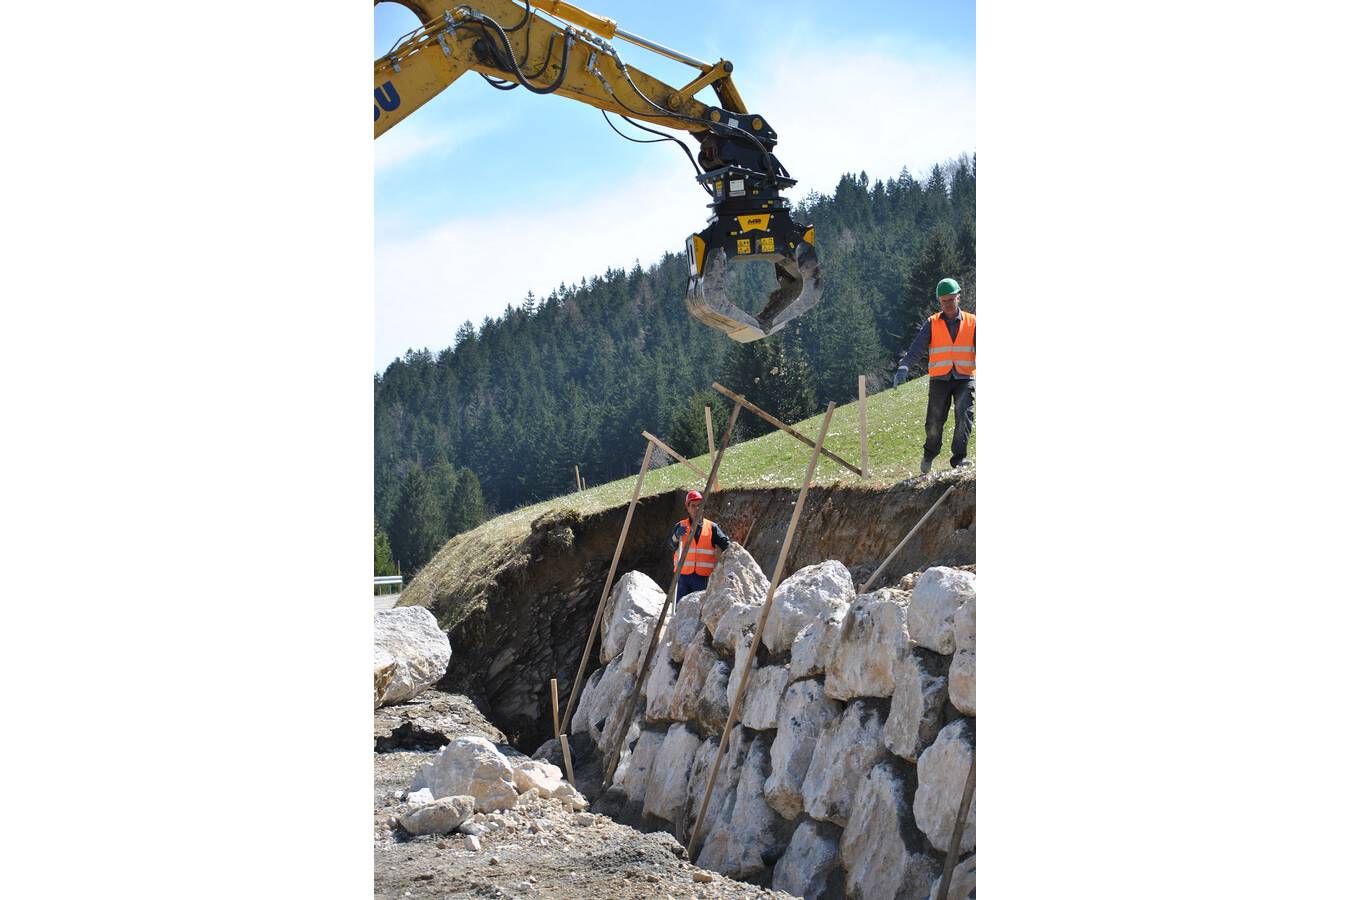 Dry stone walling: new tools to facilitate business and boost artisans The ancient art of dry stone walling becomes more structured when it meets new engineering techniques.